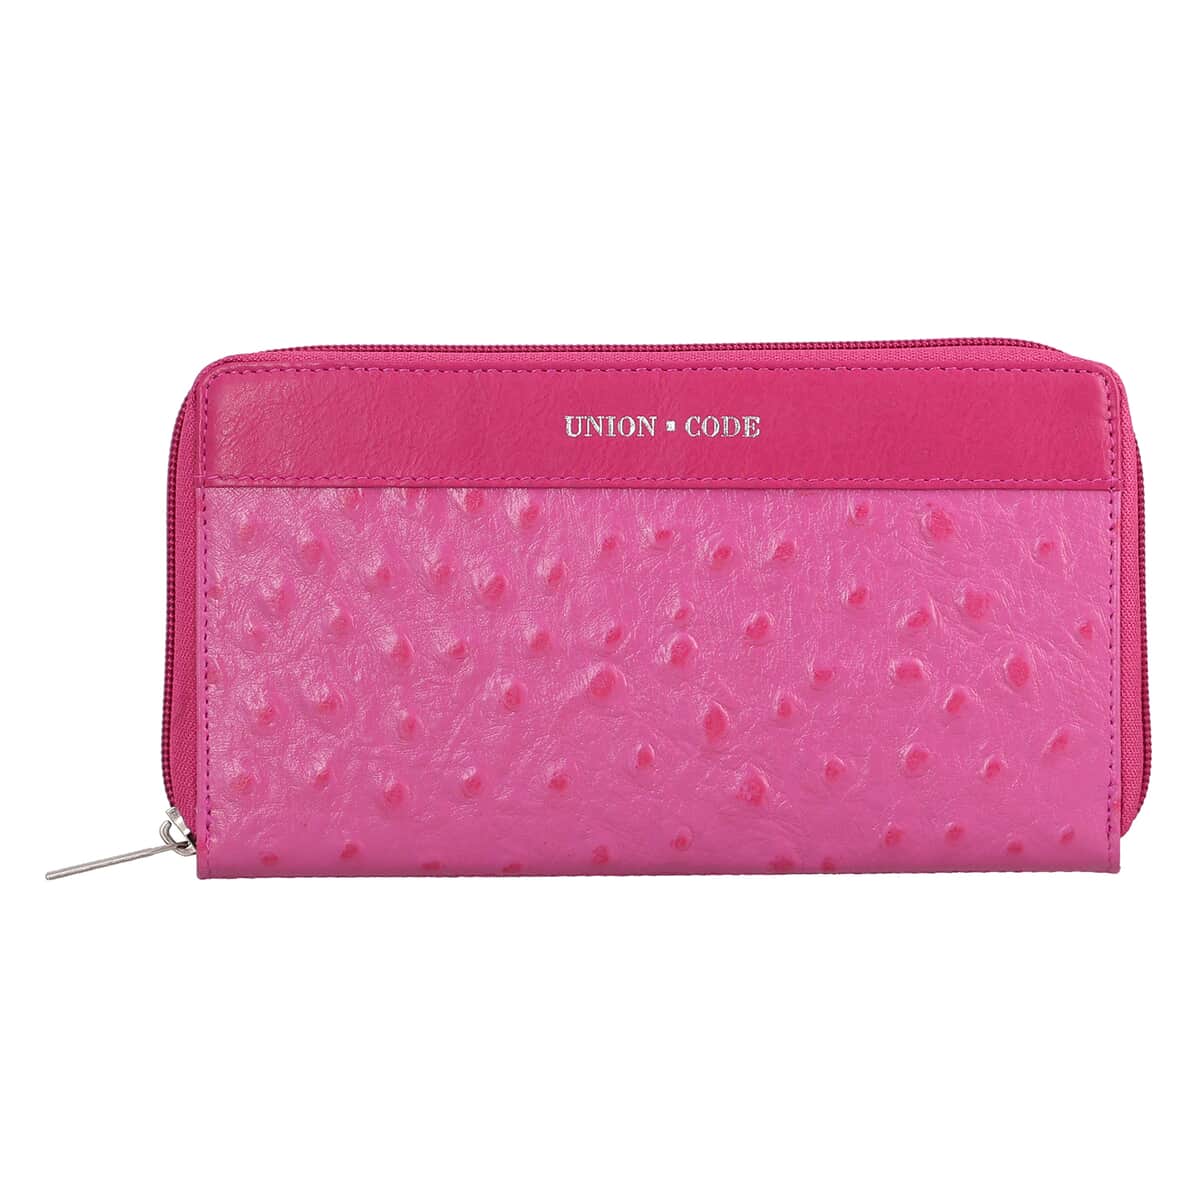 Union Code Fuchsia Ostrich Embossed Pattern Genuine Leather RFID Protected Women's Wallet image number 0